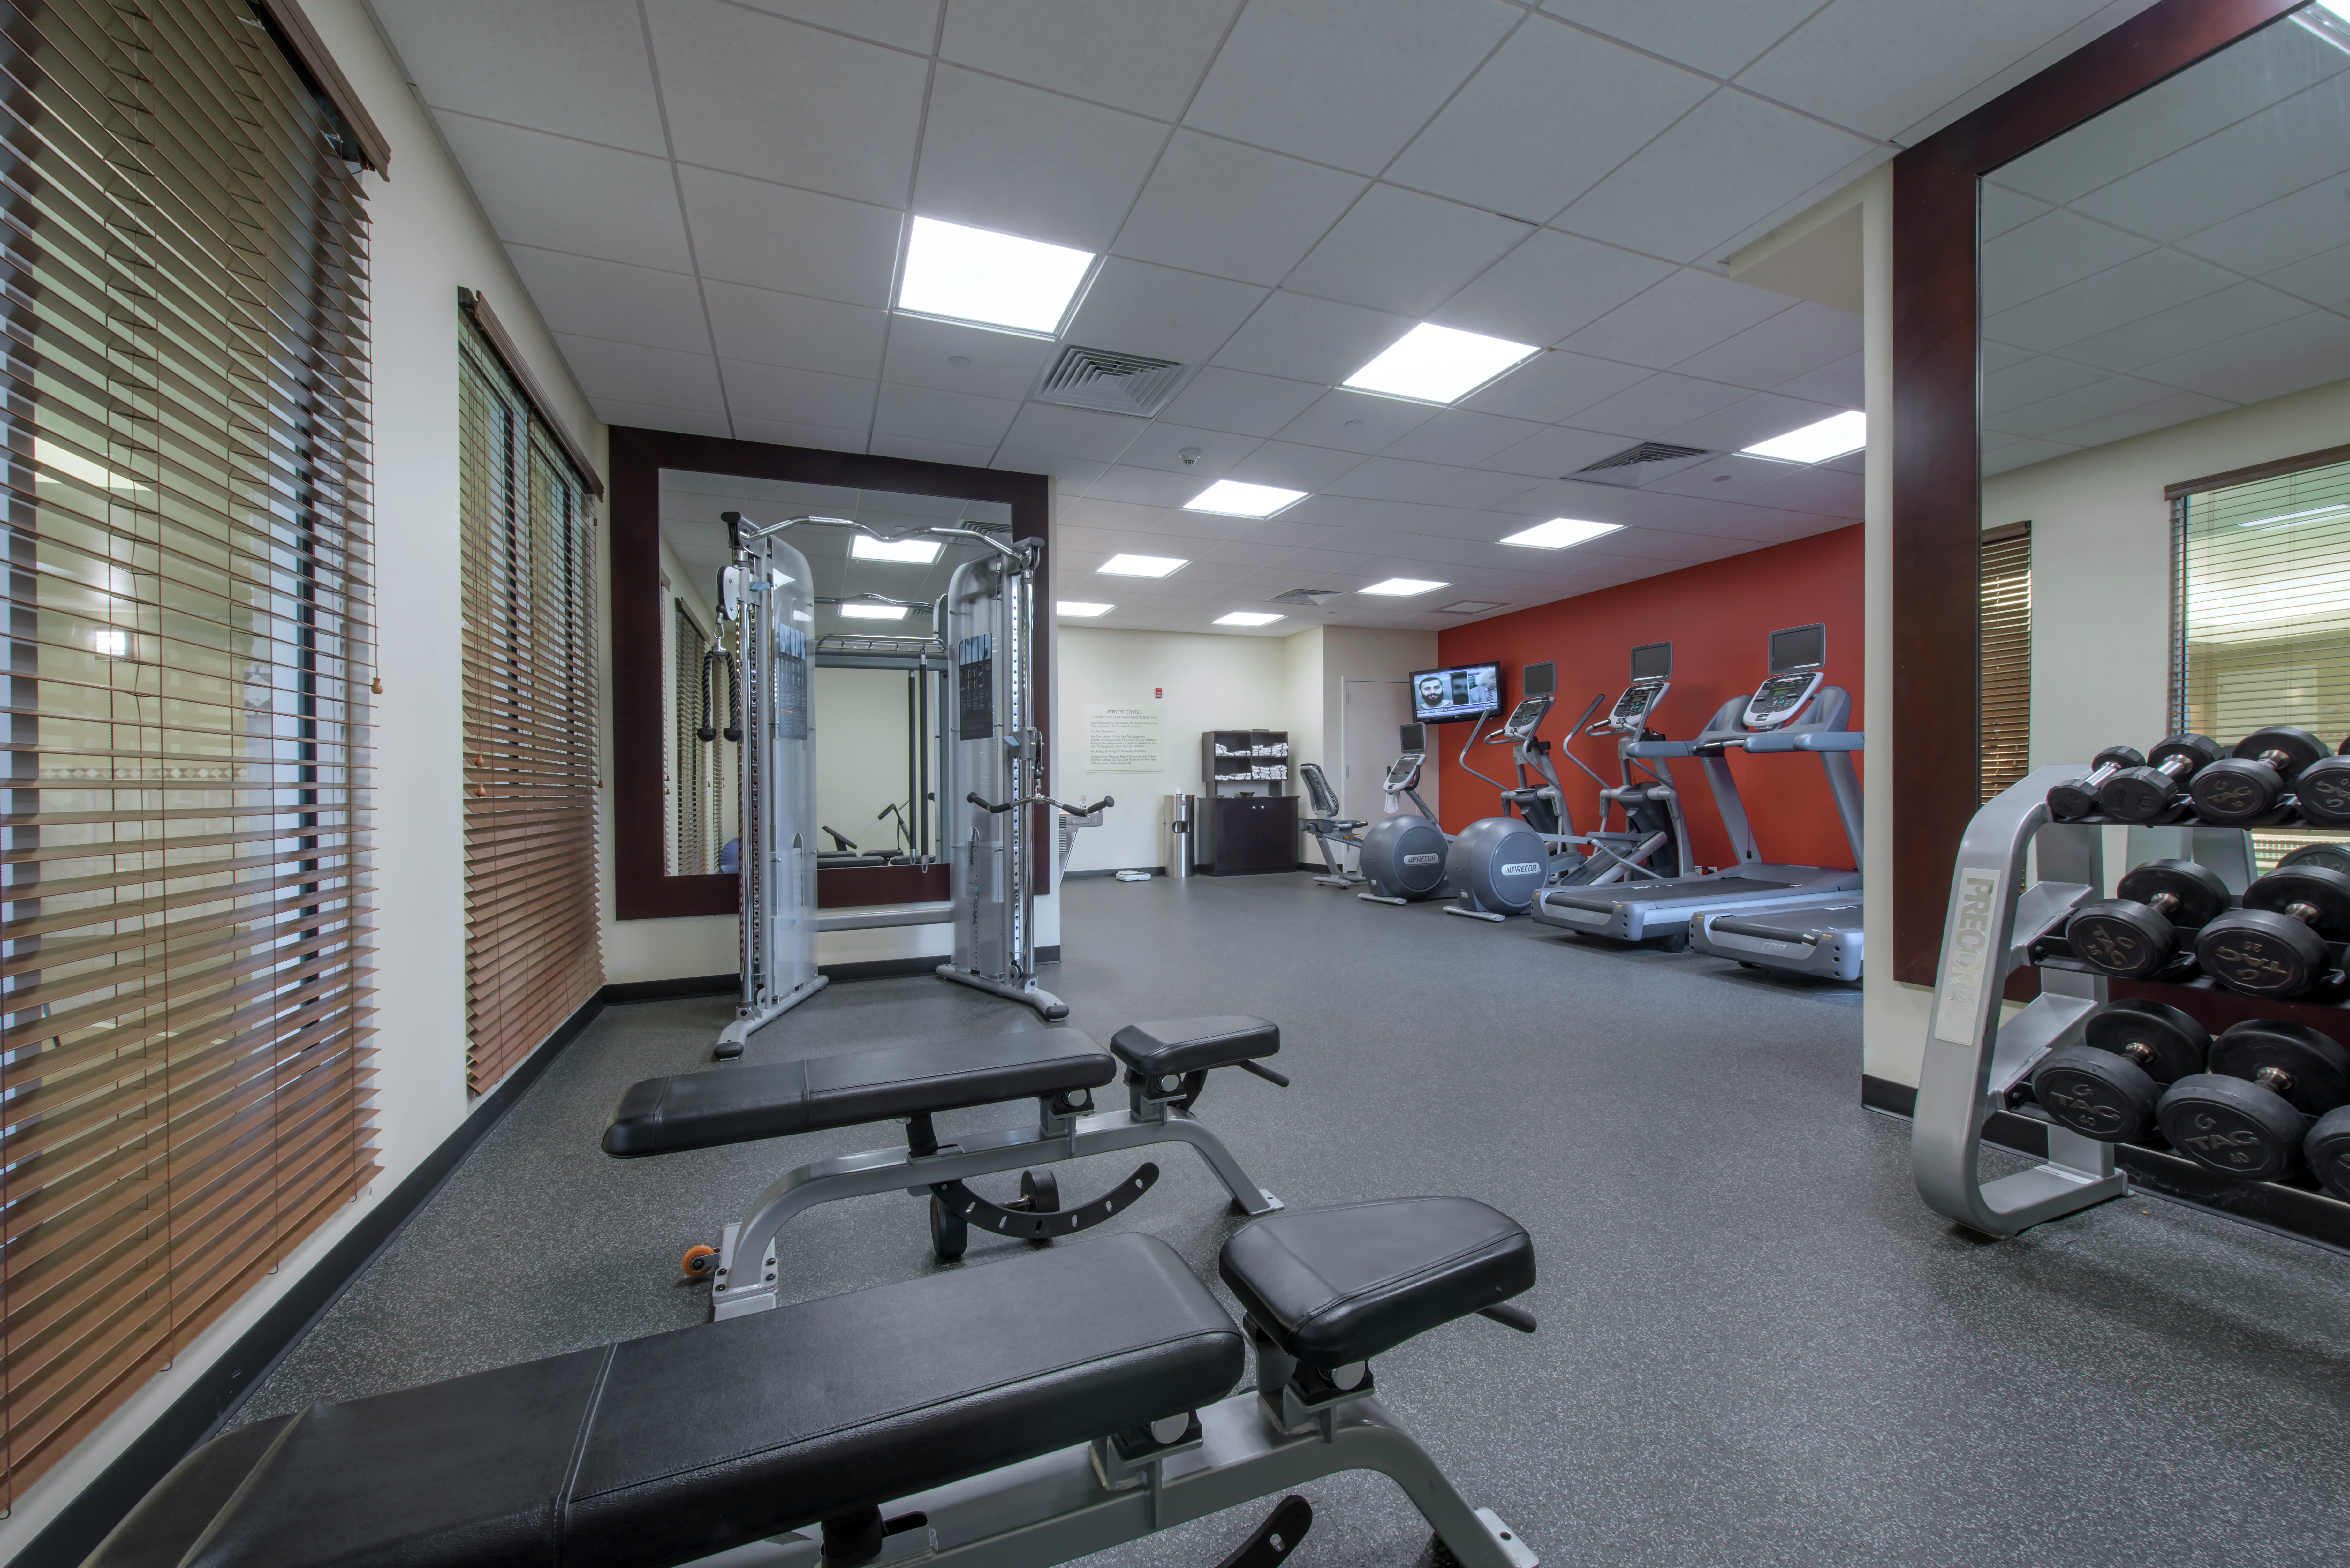 Fitness Center with Weight Benches, Weight Machine, Treadmills and Cross-Trainer